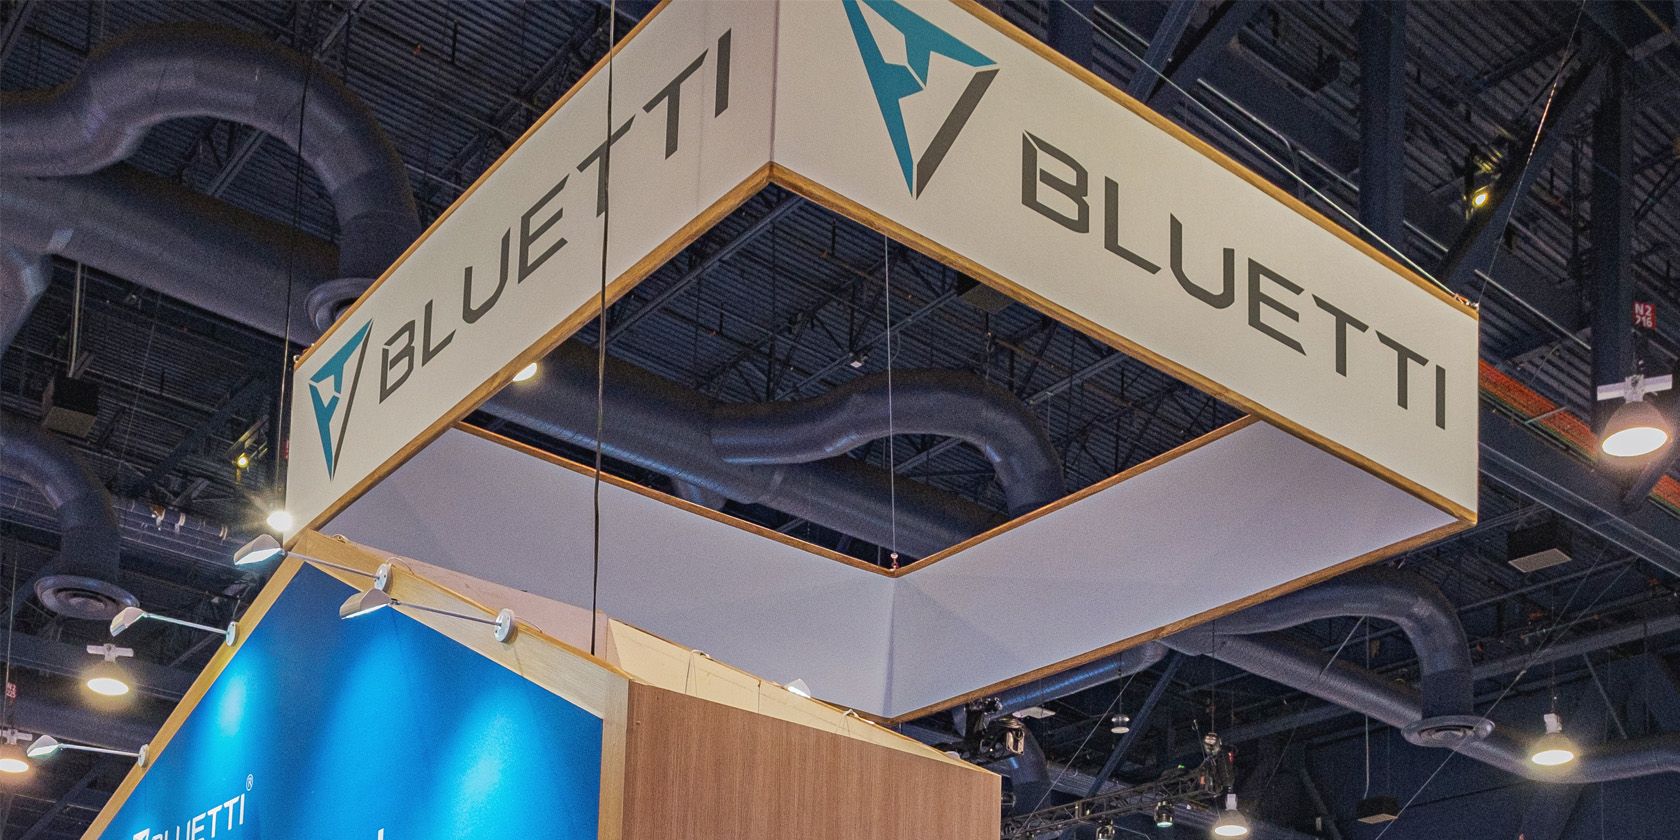 The Bluetti booth at CES 2022.